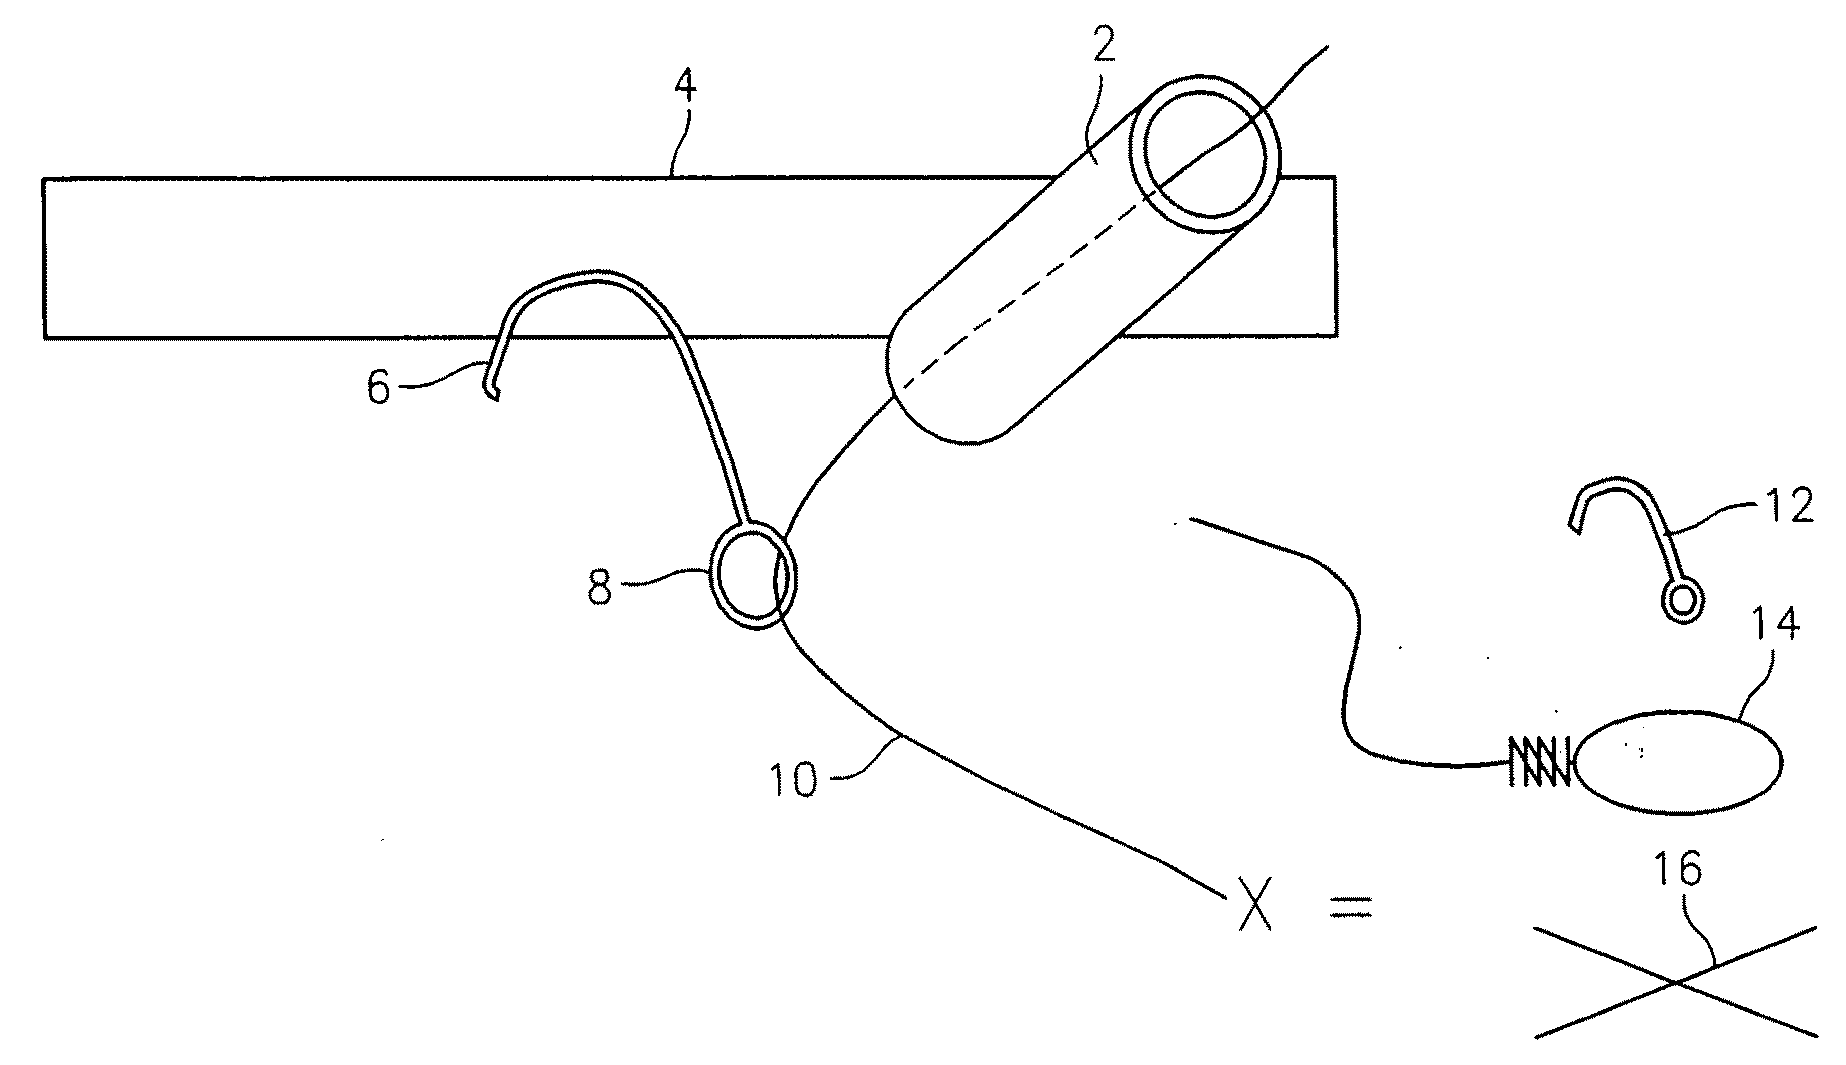 Suspension/retraction device for surgical manipulation